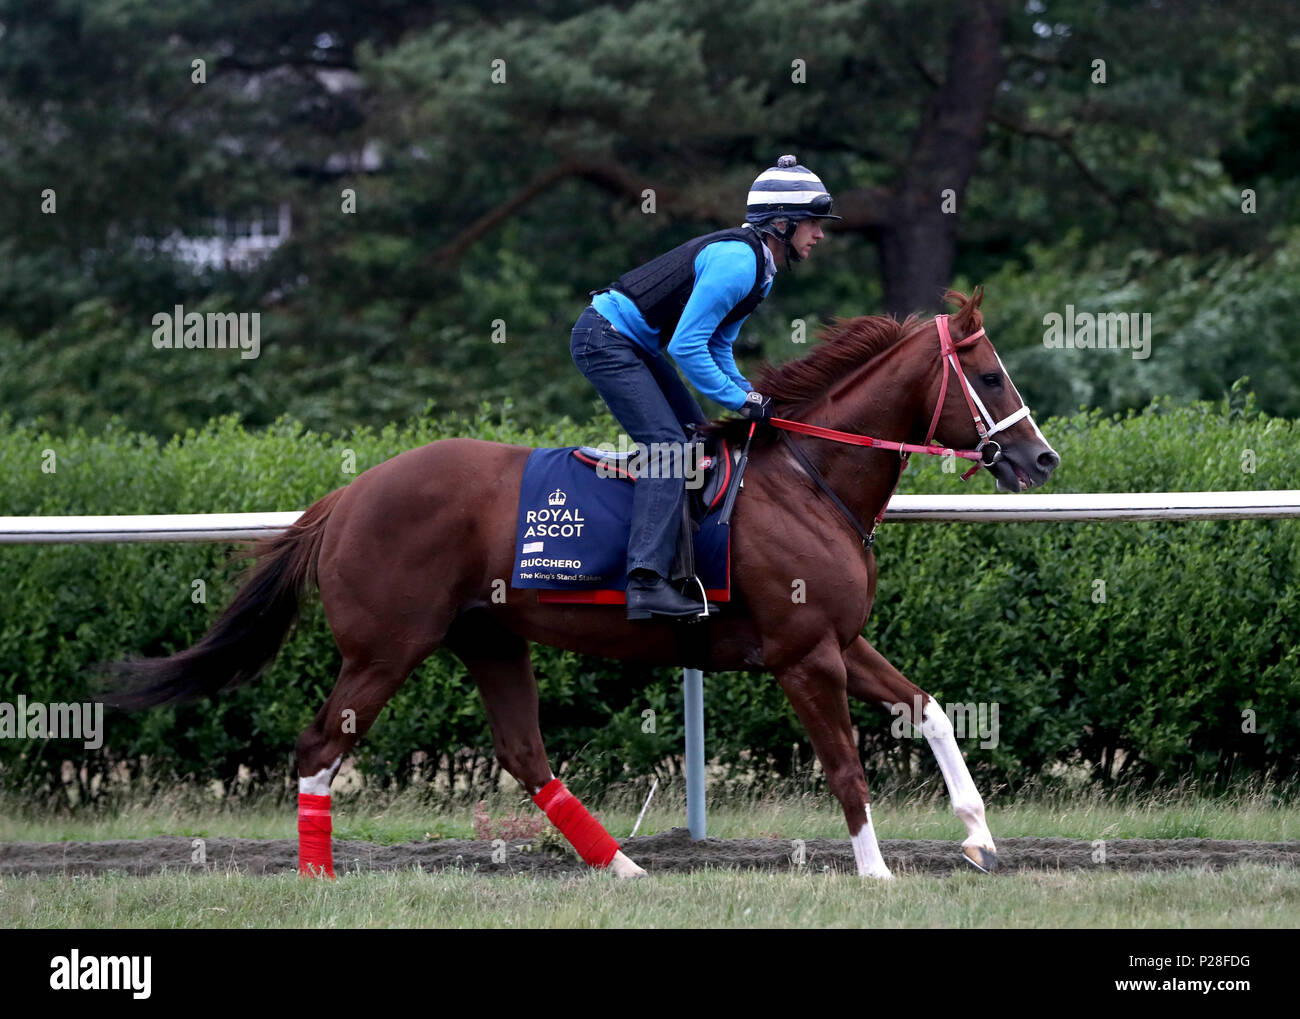 Bucchero is exercised on the gallops during the Royal Ascot international challengers press morning at Newmarket Racecourse. PRESS ASSOCIATION Photo. Picture date: Thursday June 14, 2018. See PA story RACING Ascot. Photo credit should read: Simon Cooper/PA Wire Stock Photo